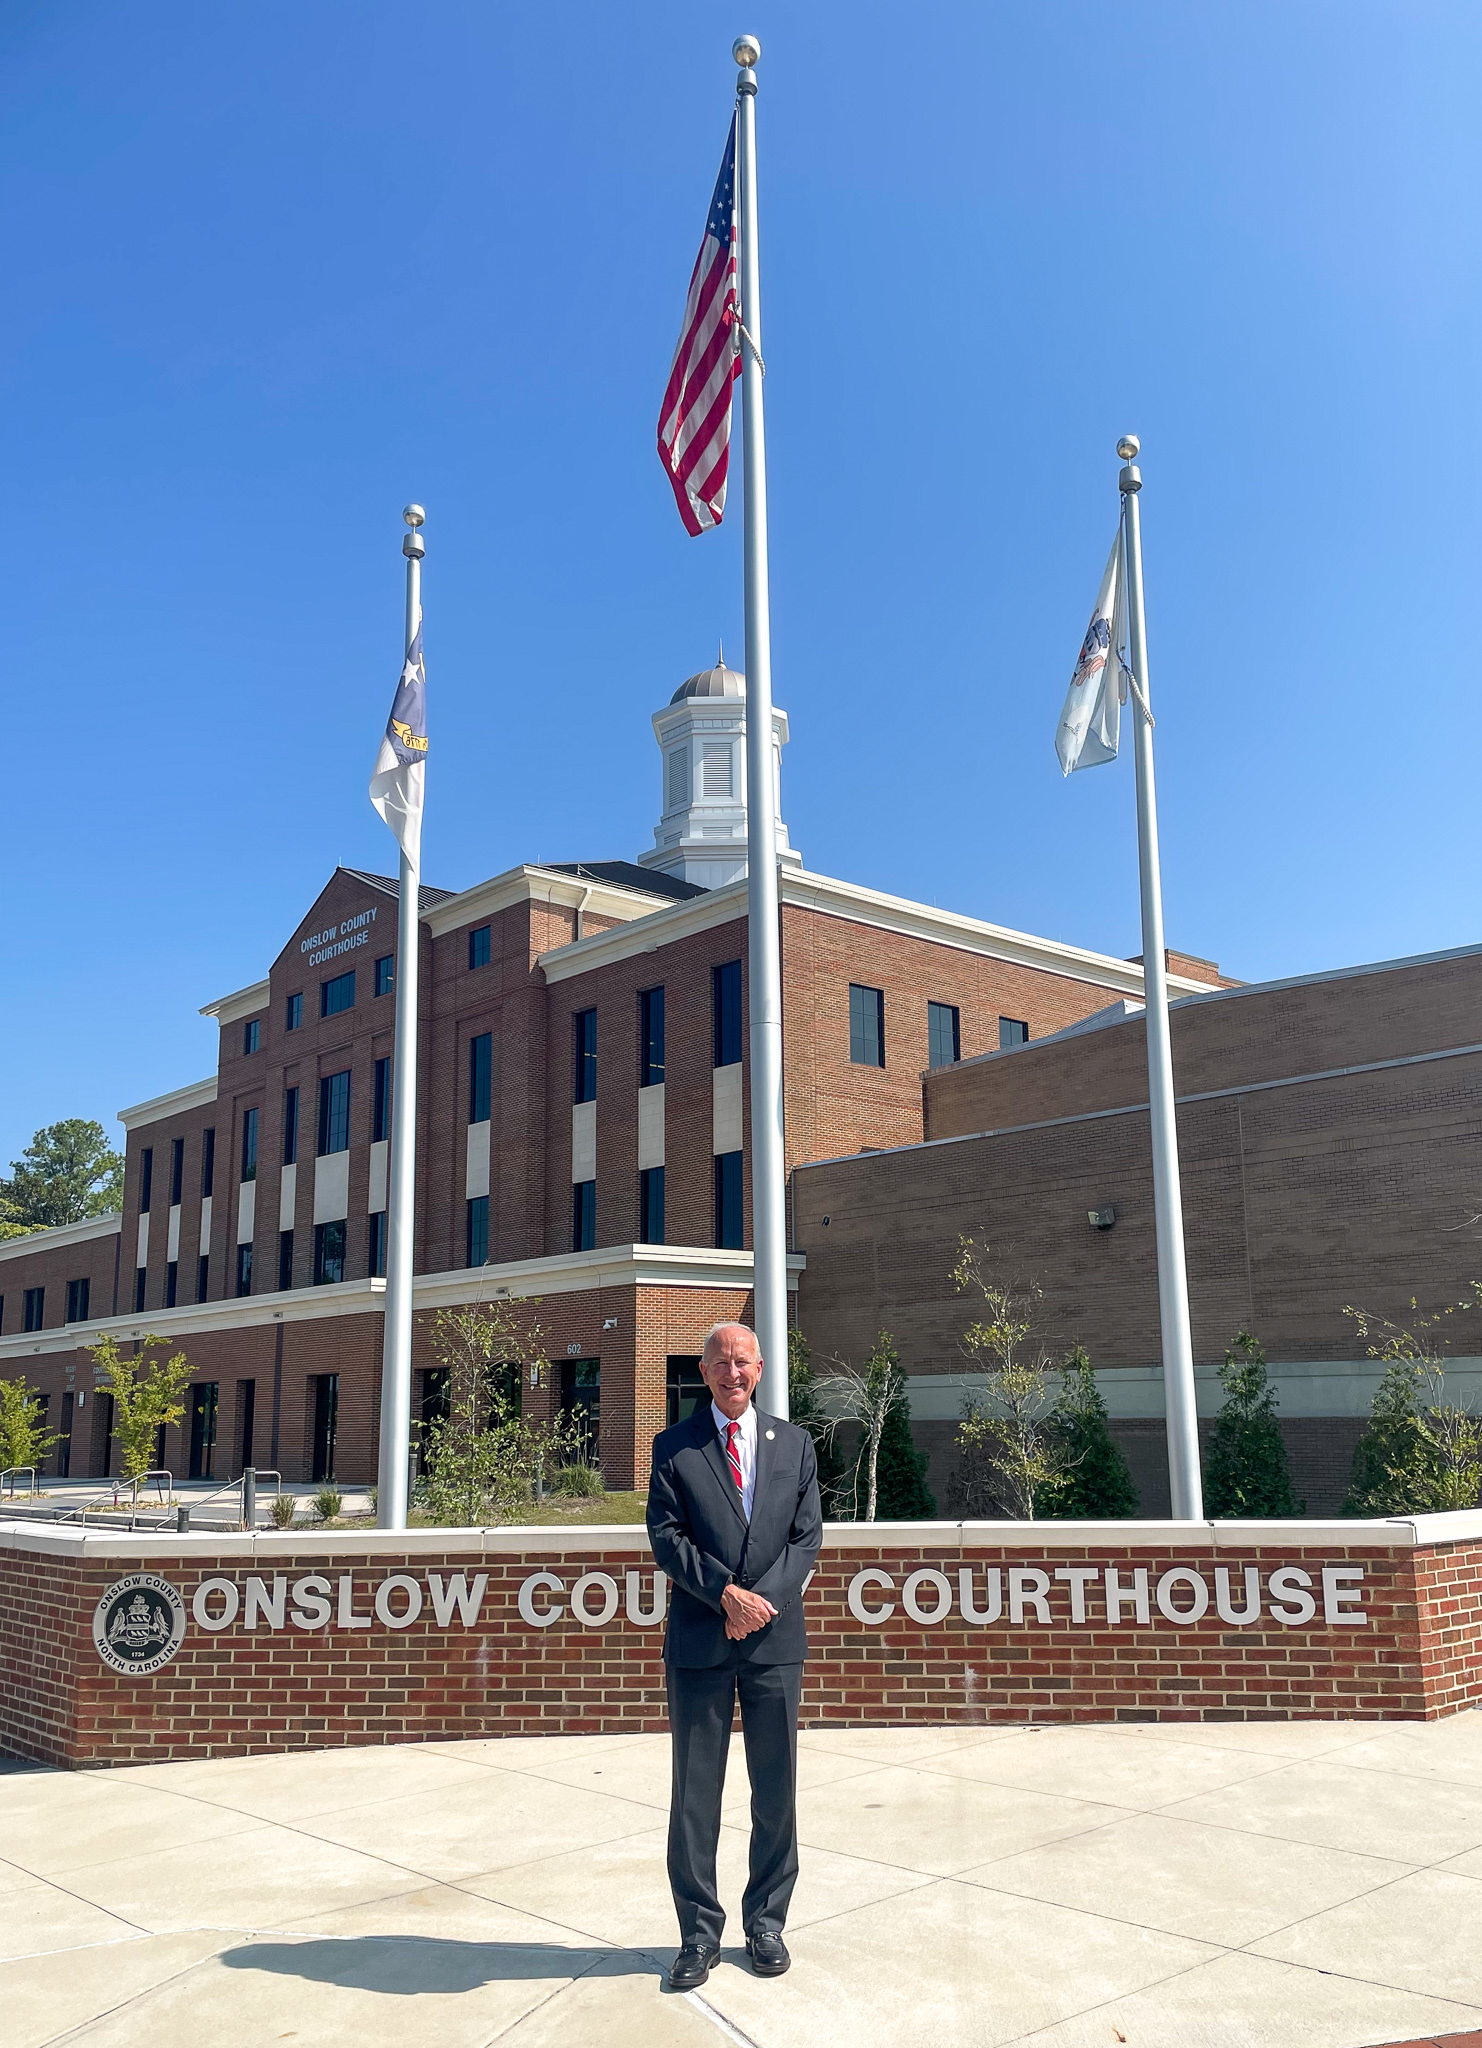 Onslow County Courthouse